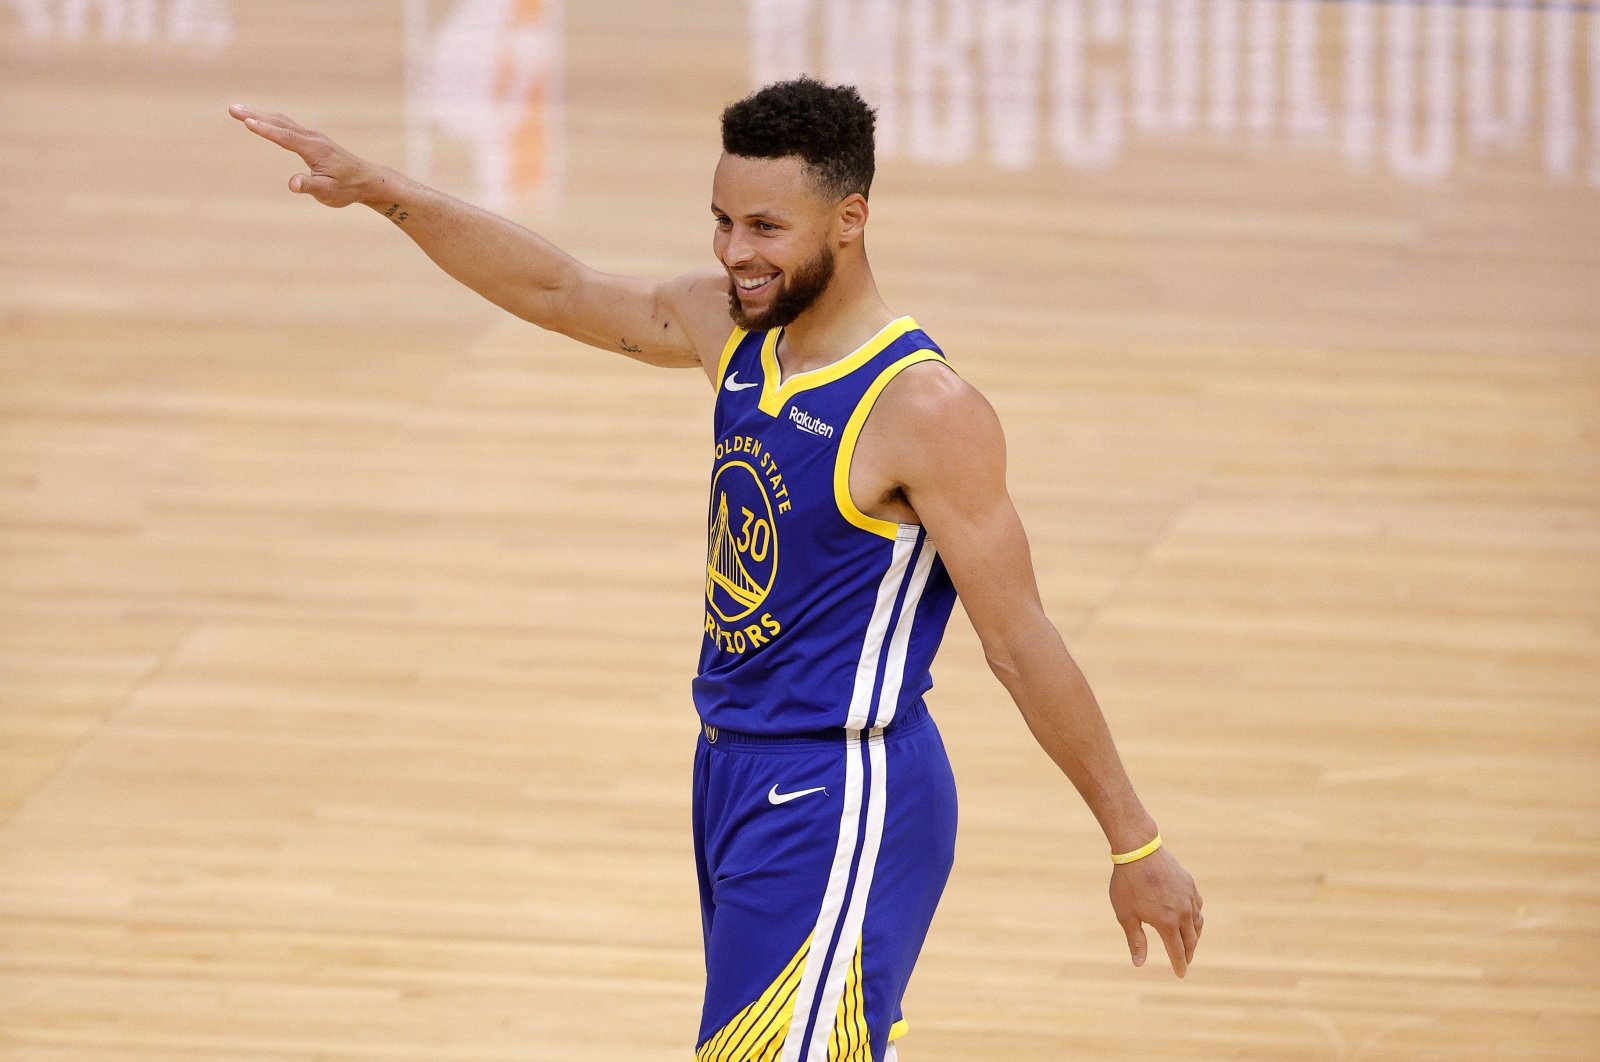 Golden State Warriors' Stephen Curry reacts after the Warriors made a basket against the Denver Nuggets at Chase Center, San Francisco, California, April 12, 2021. (AFP Photo)